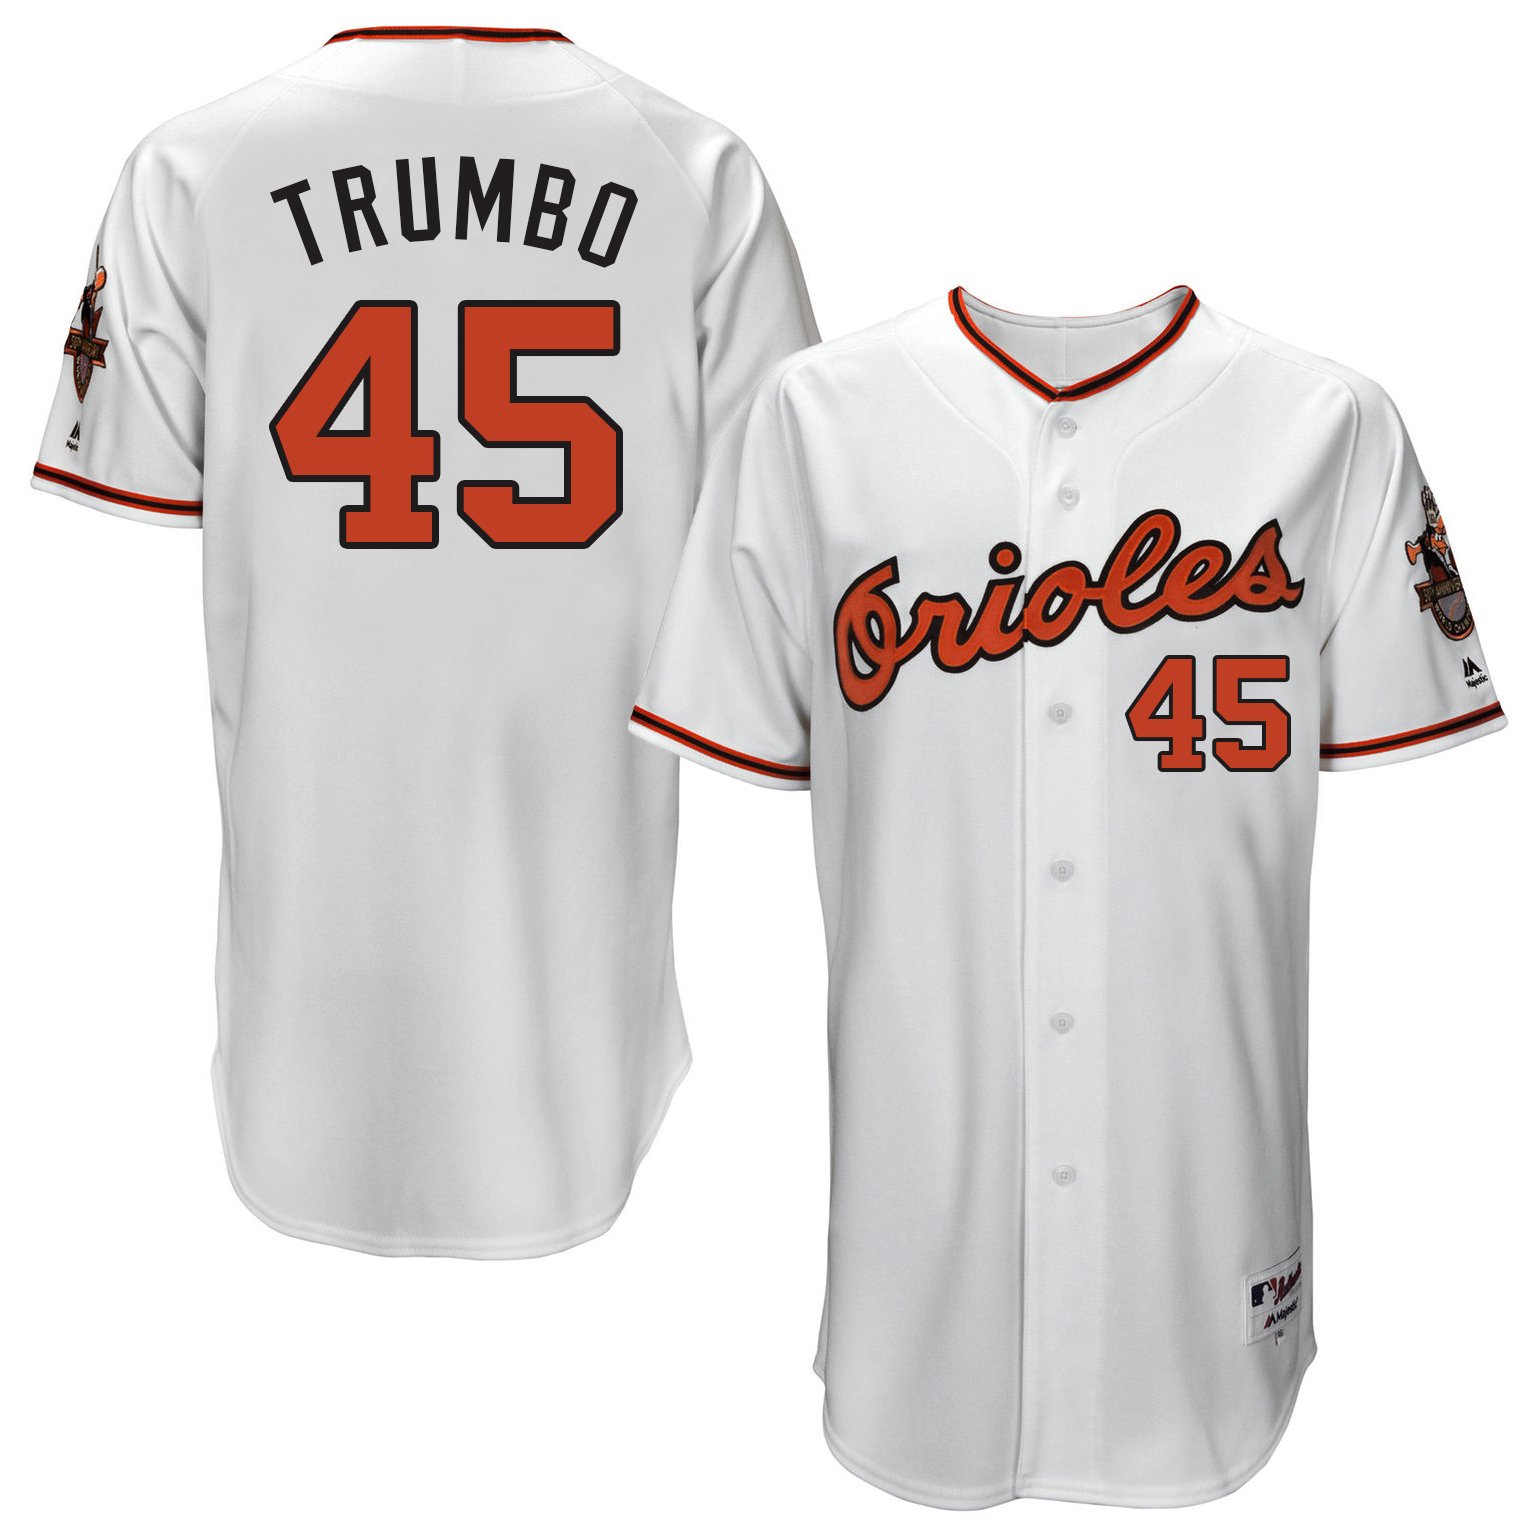 Orioles 45 Mark Trumbo White Throwback Jersey - Click Image to Close